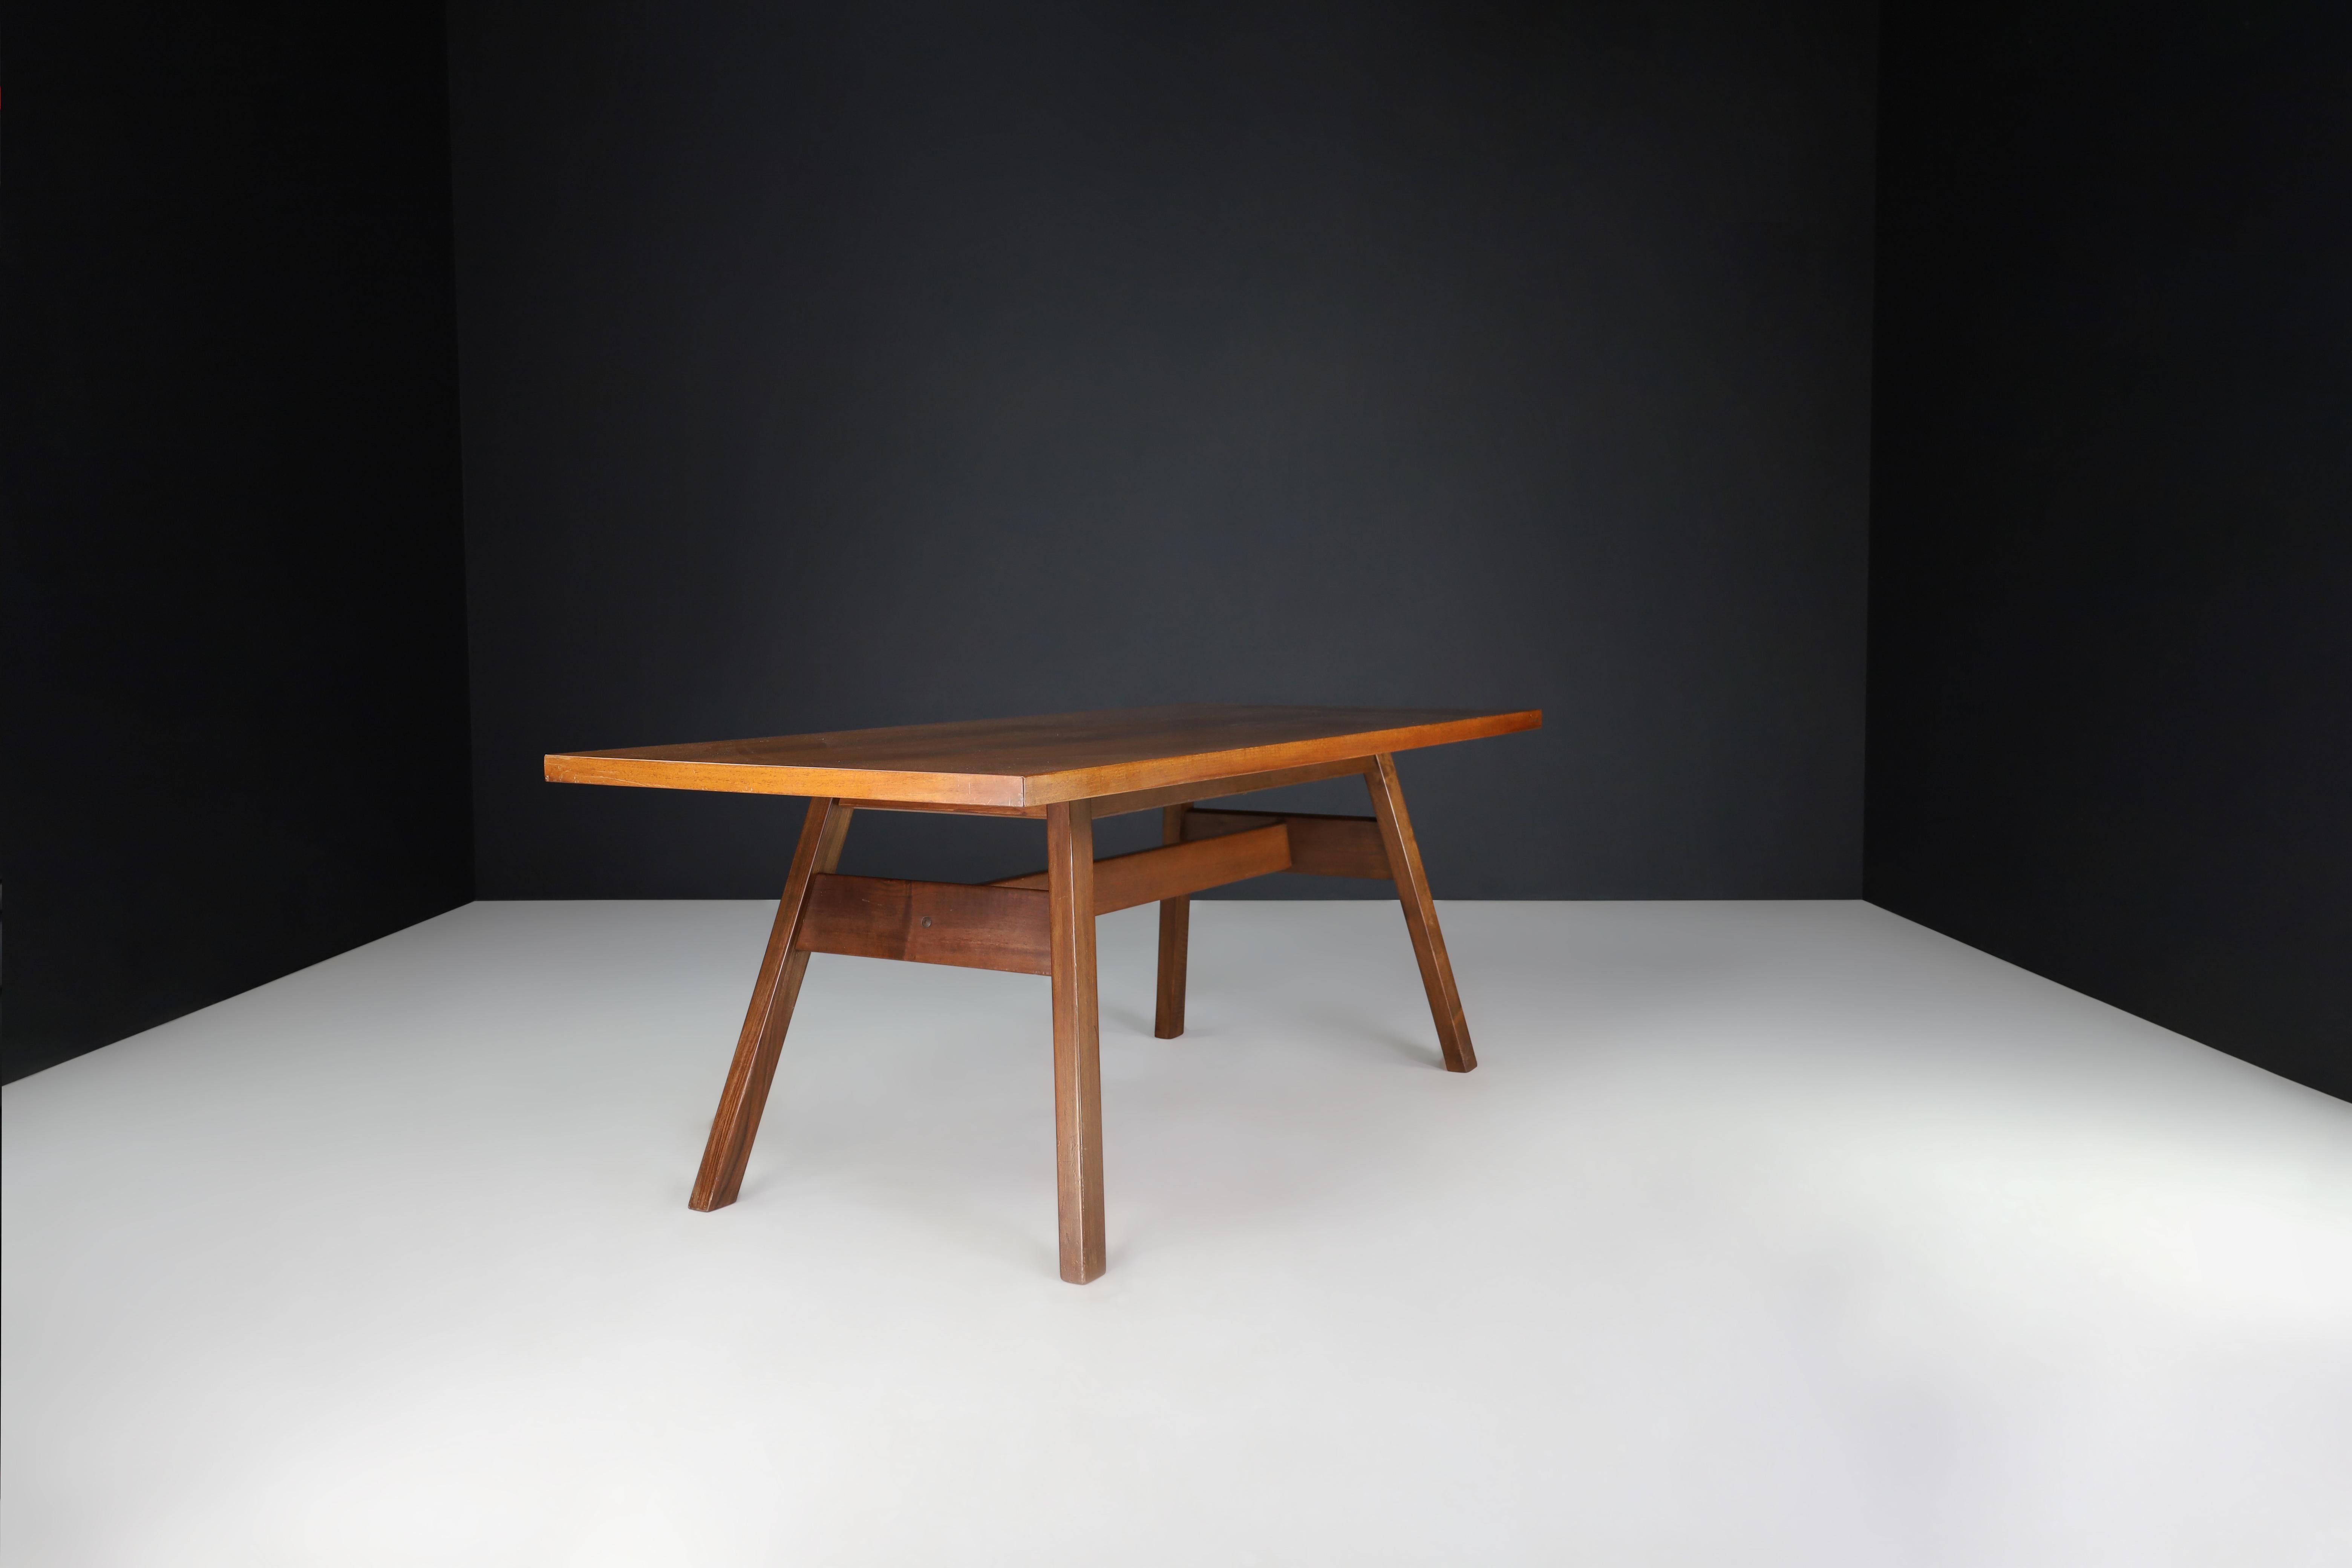 Giovanni Michelucci Walnut Dining Room Table for Poltronova, Italy, 1964 For Sale 7